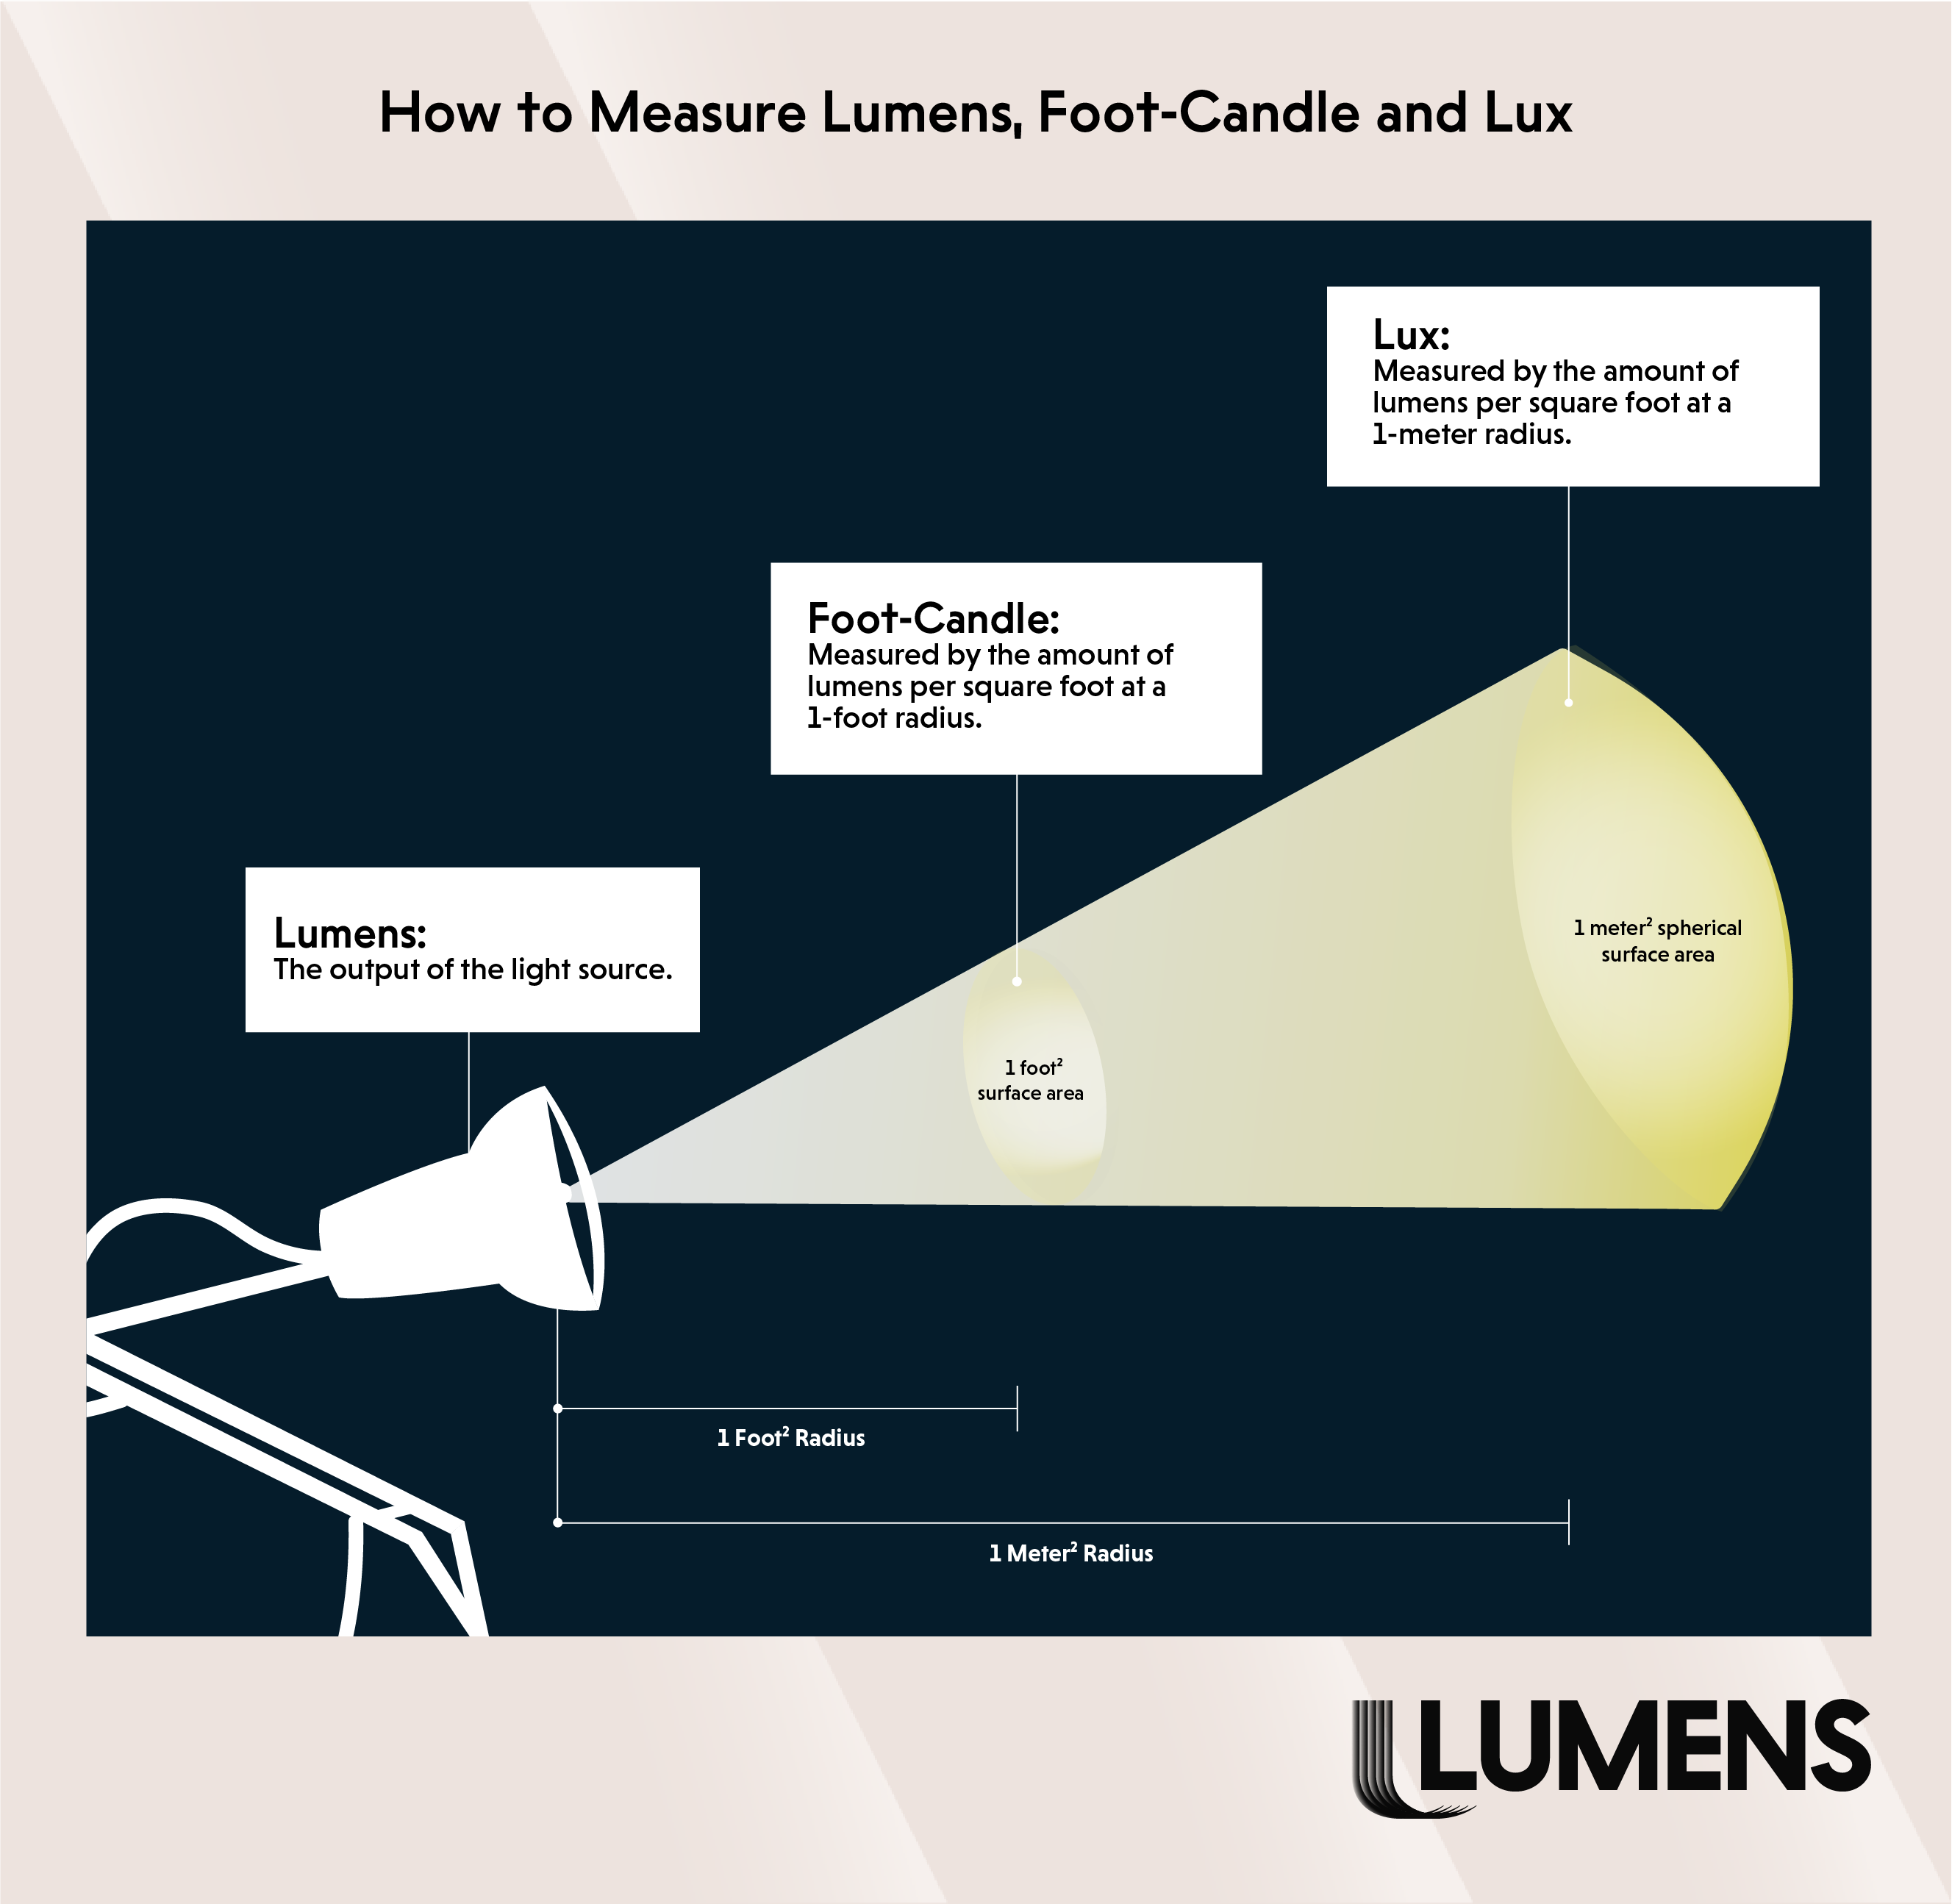 How to Measure Lumens, Foot-Candle, and Lux